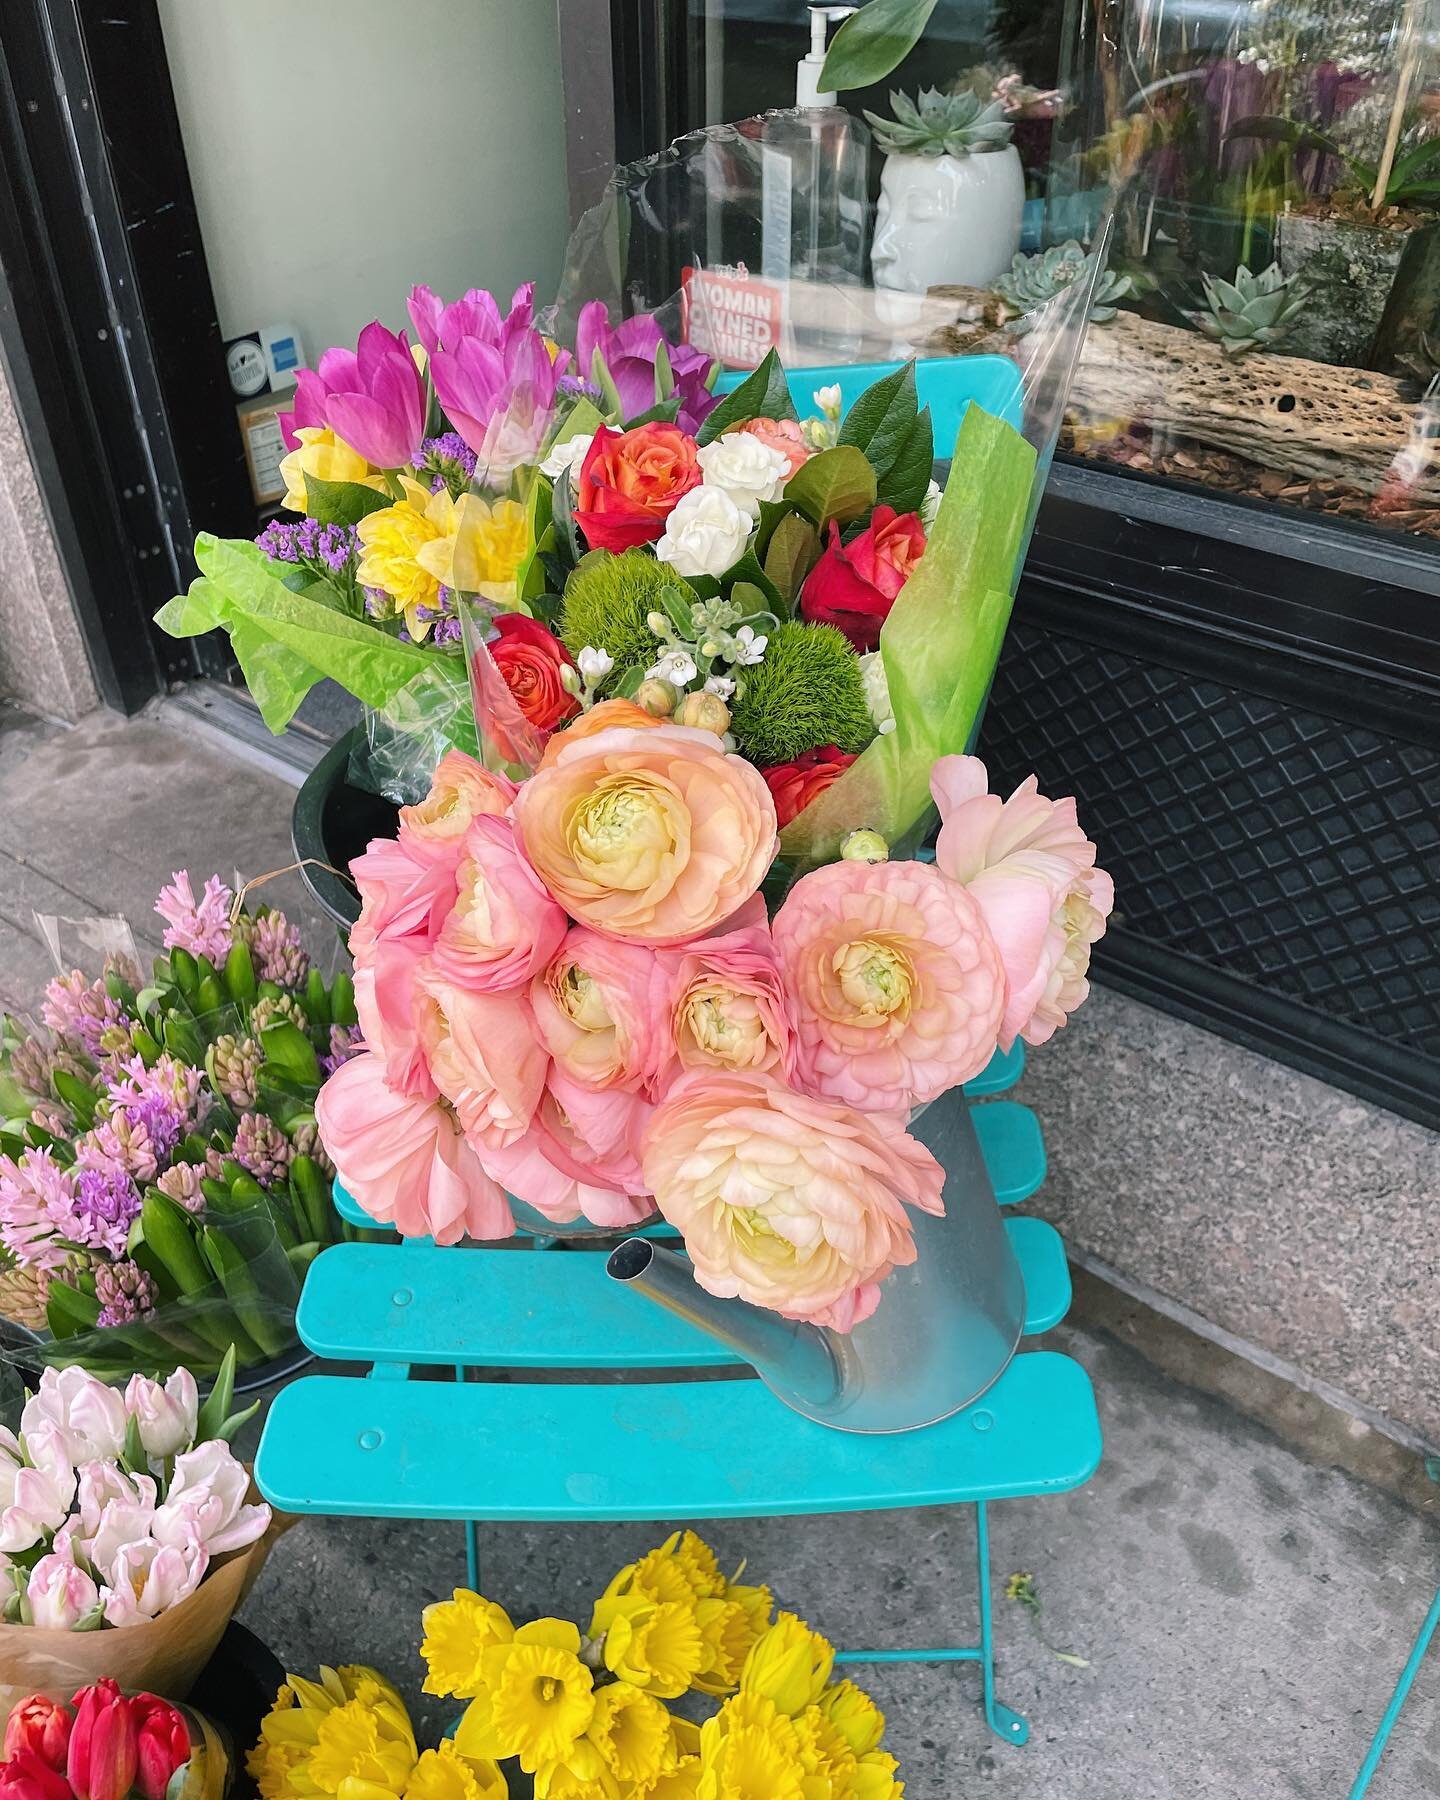 We love spring time in the city! Need a great floral arrangement? Check out Alexander Florals on Madison and 87th. 💐